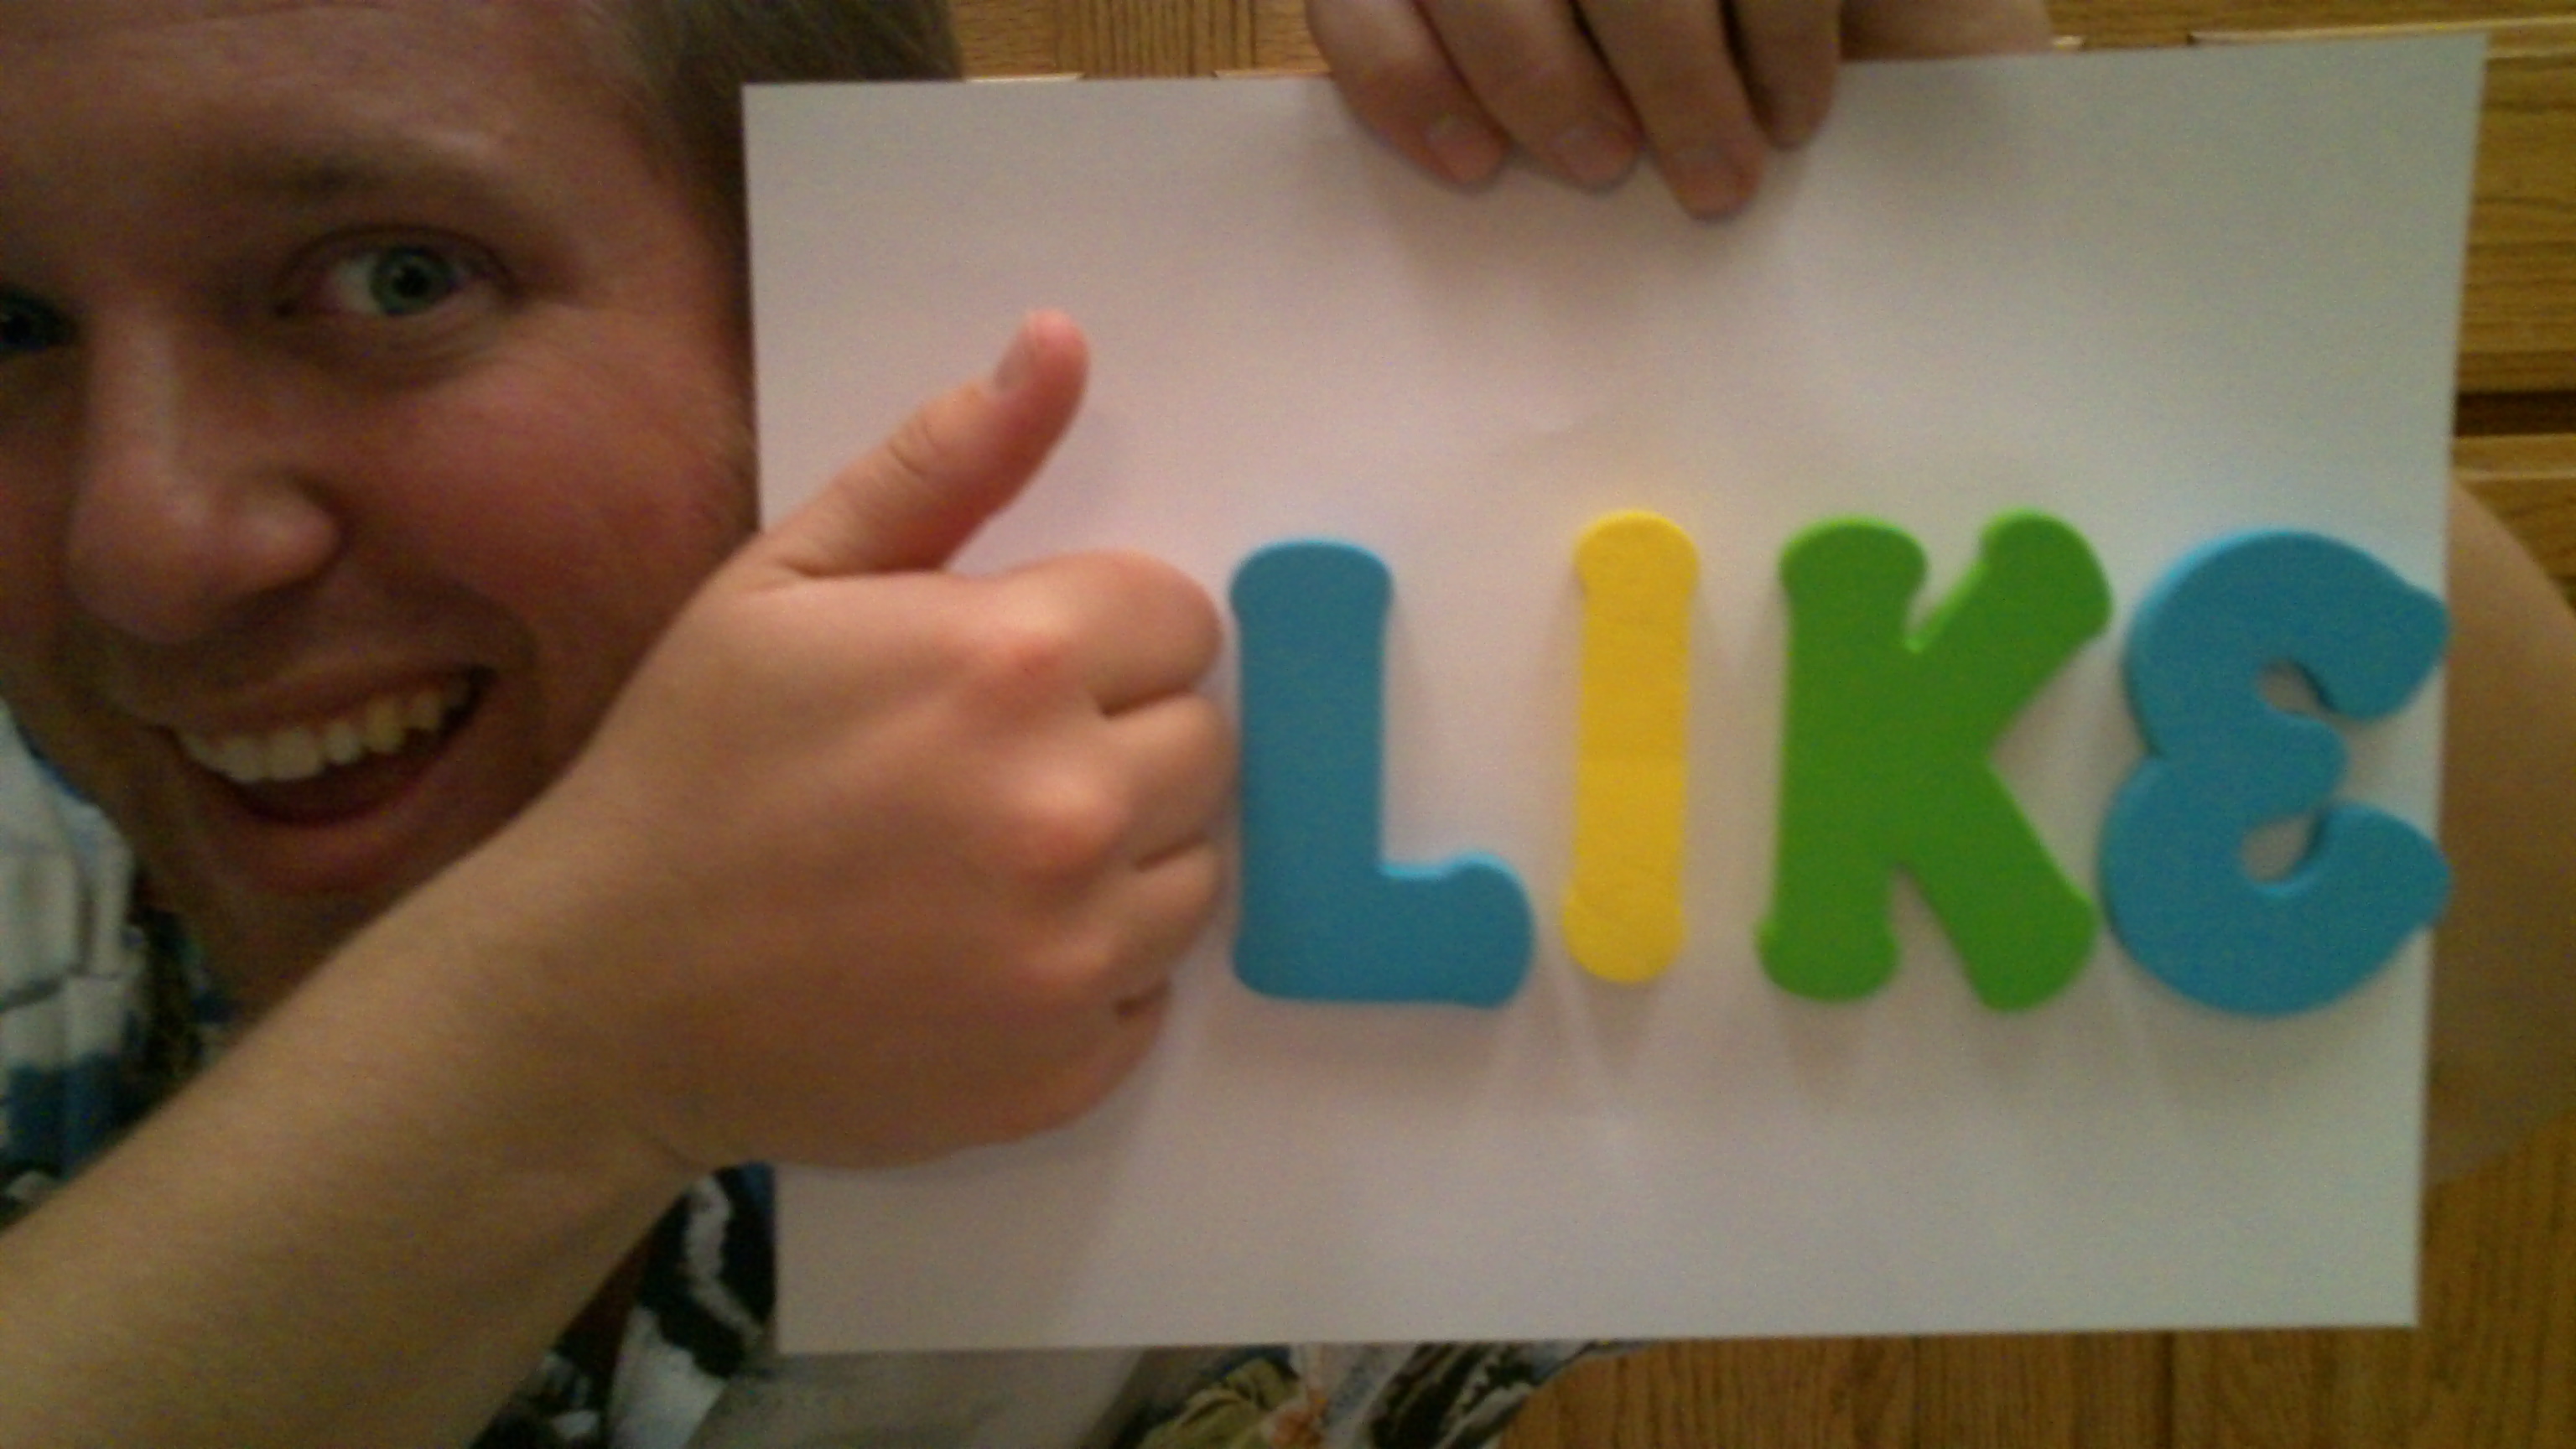 Placing a Facebook like button on your website or blog is the cool thing to do.